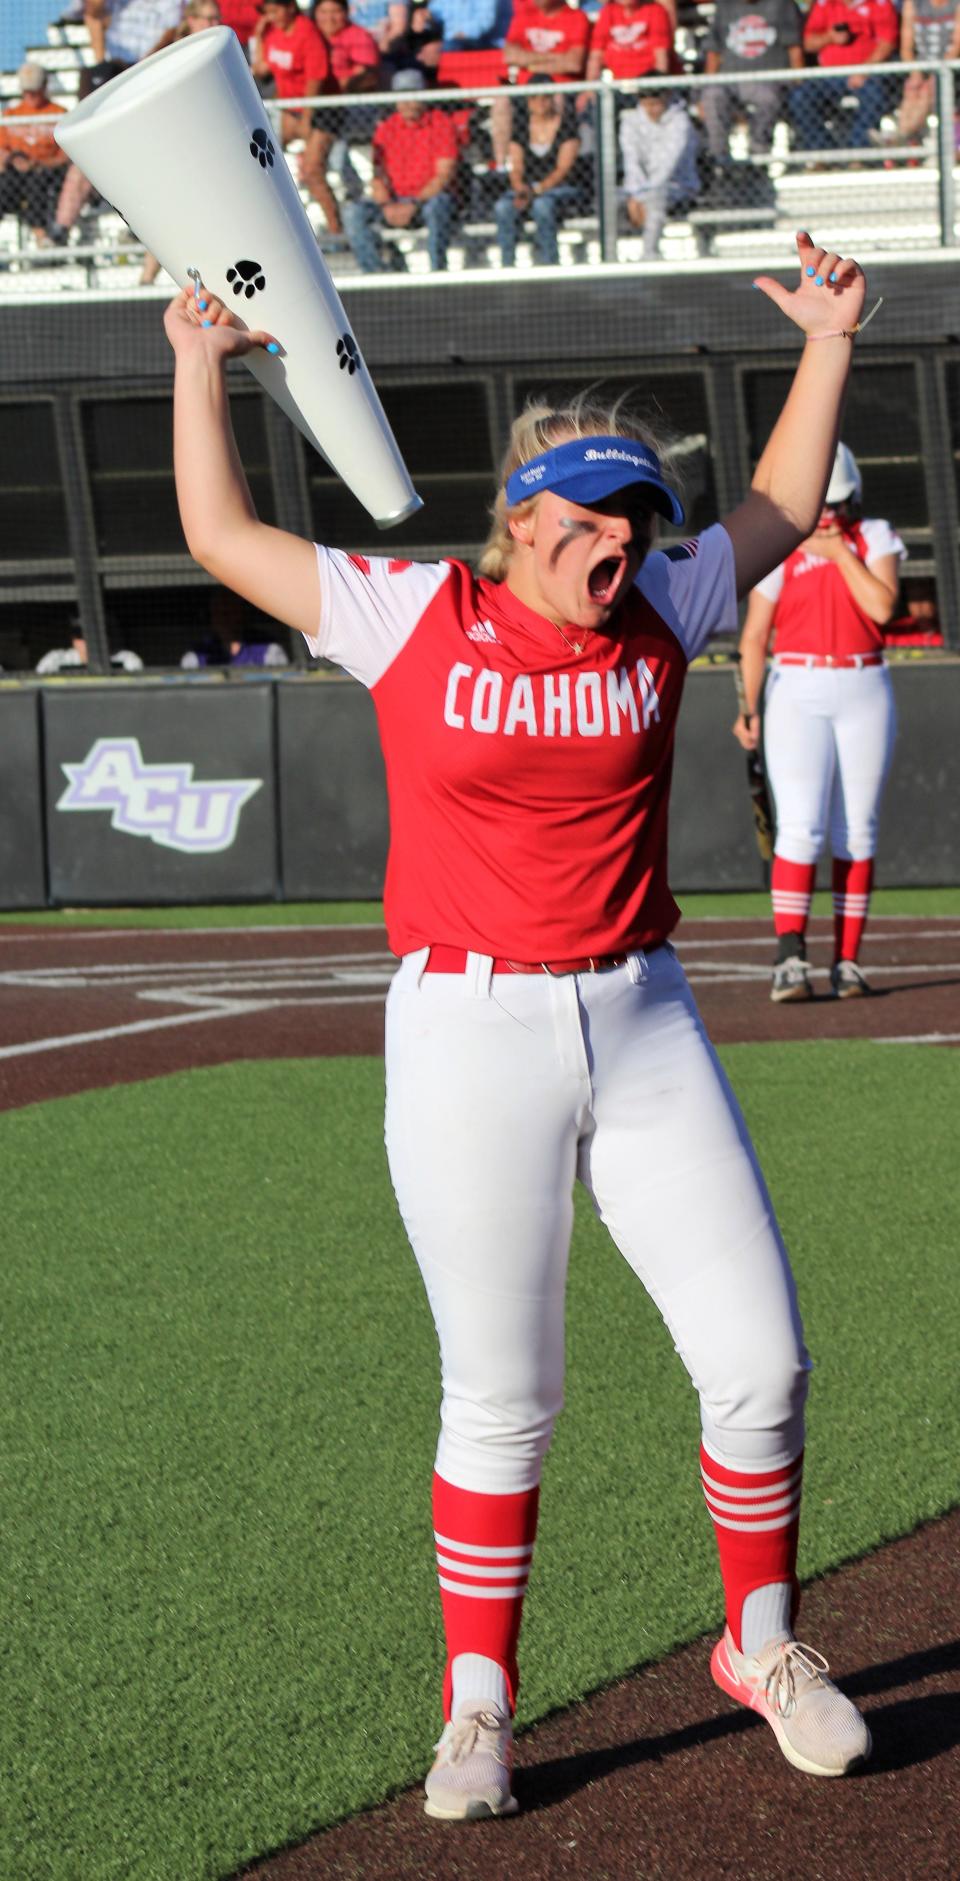 Coahoma's Lexi King led her team and fans in cheers before and between innings Thursday against Holliday.